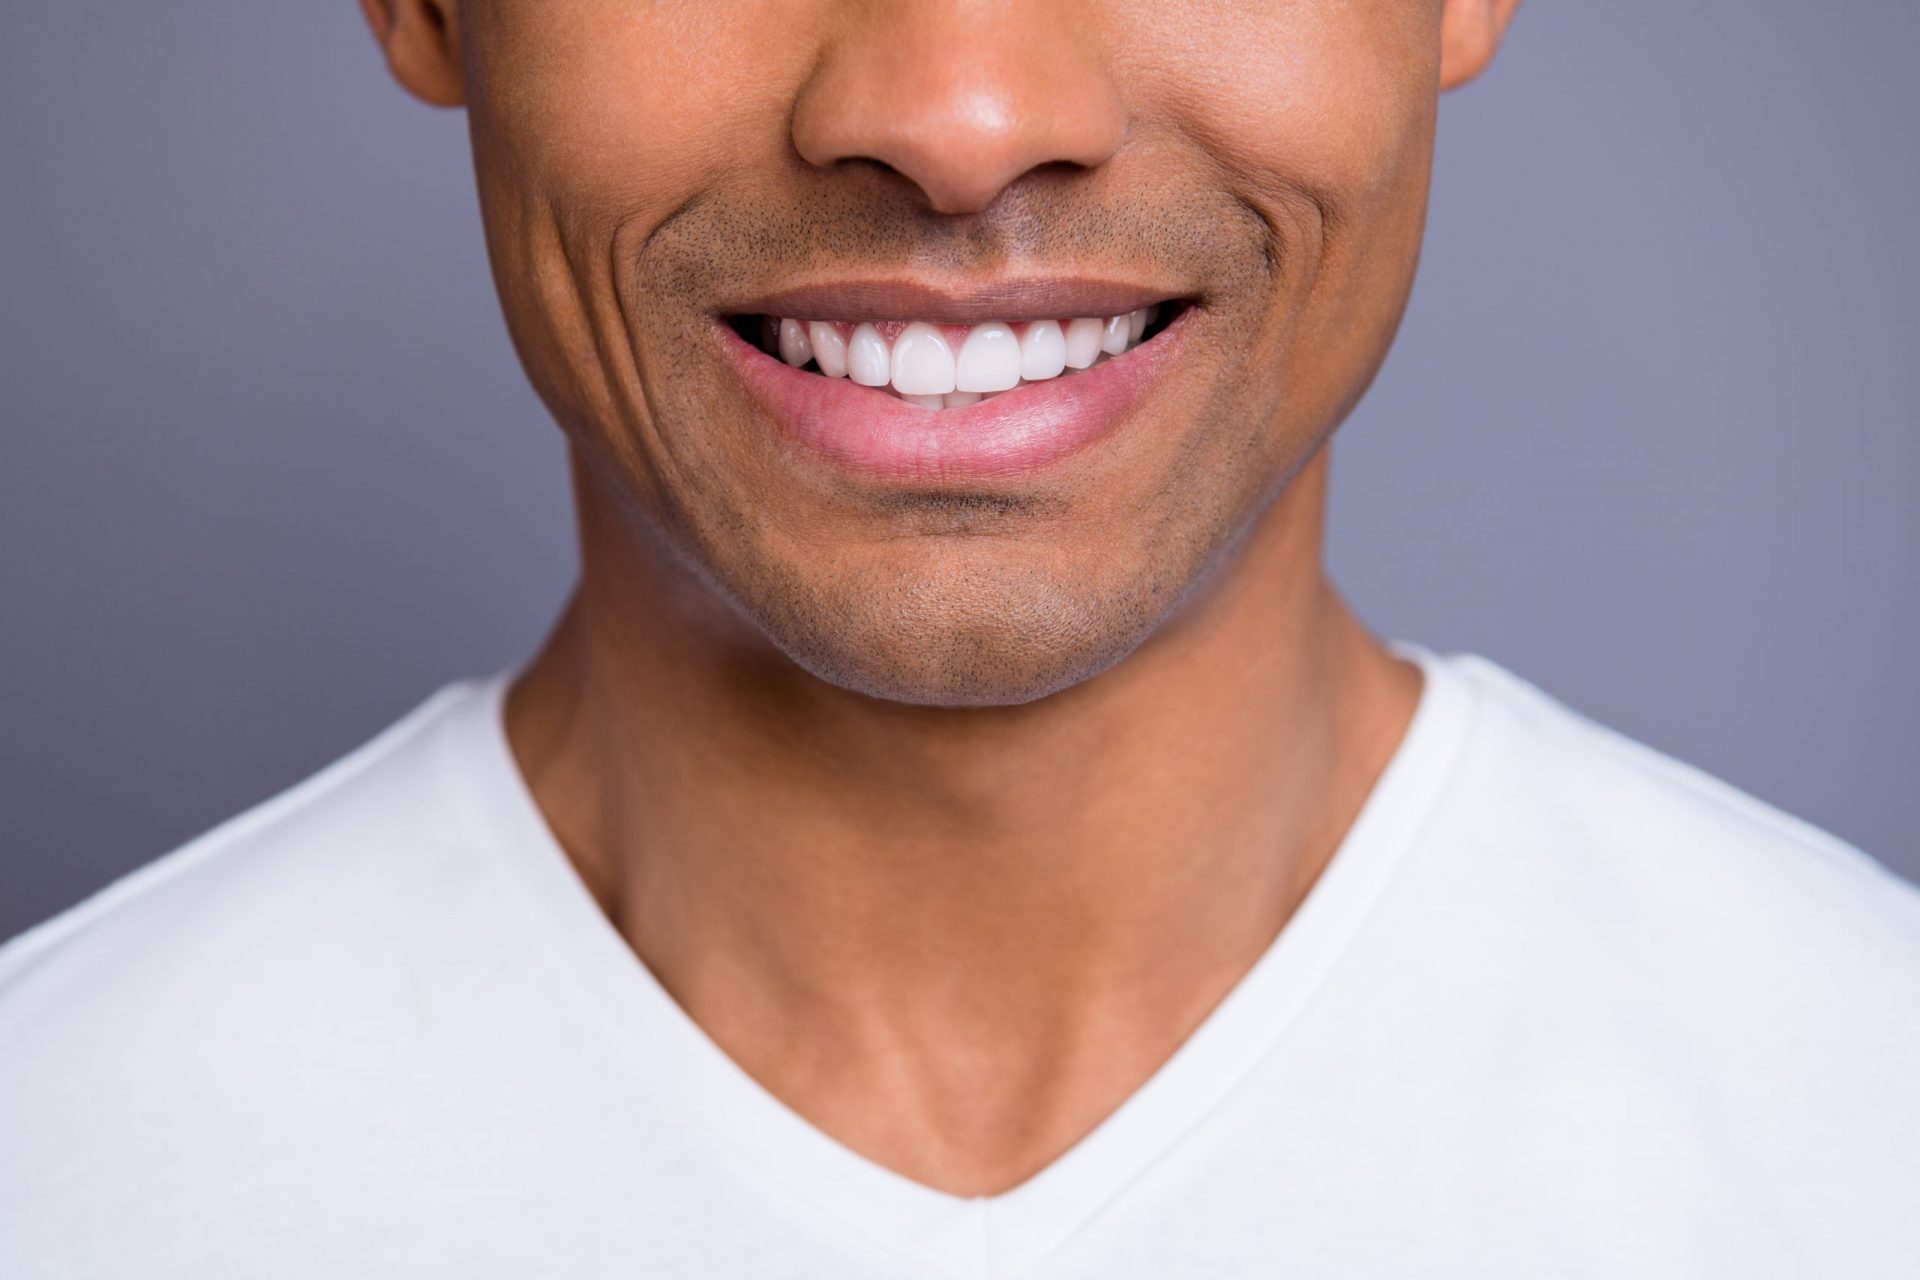 Man without periodontal disease smiling with white teeth.